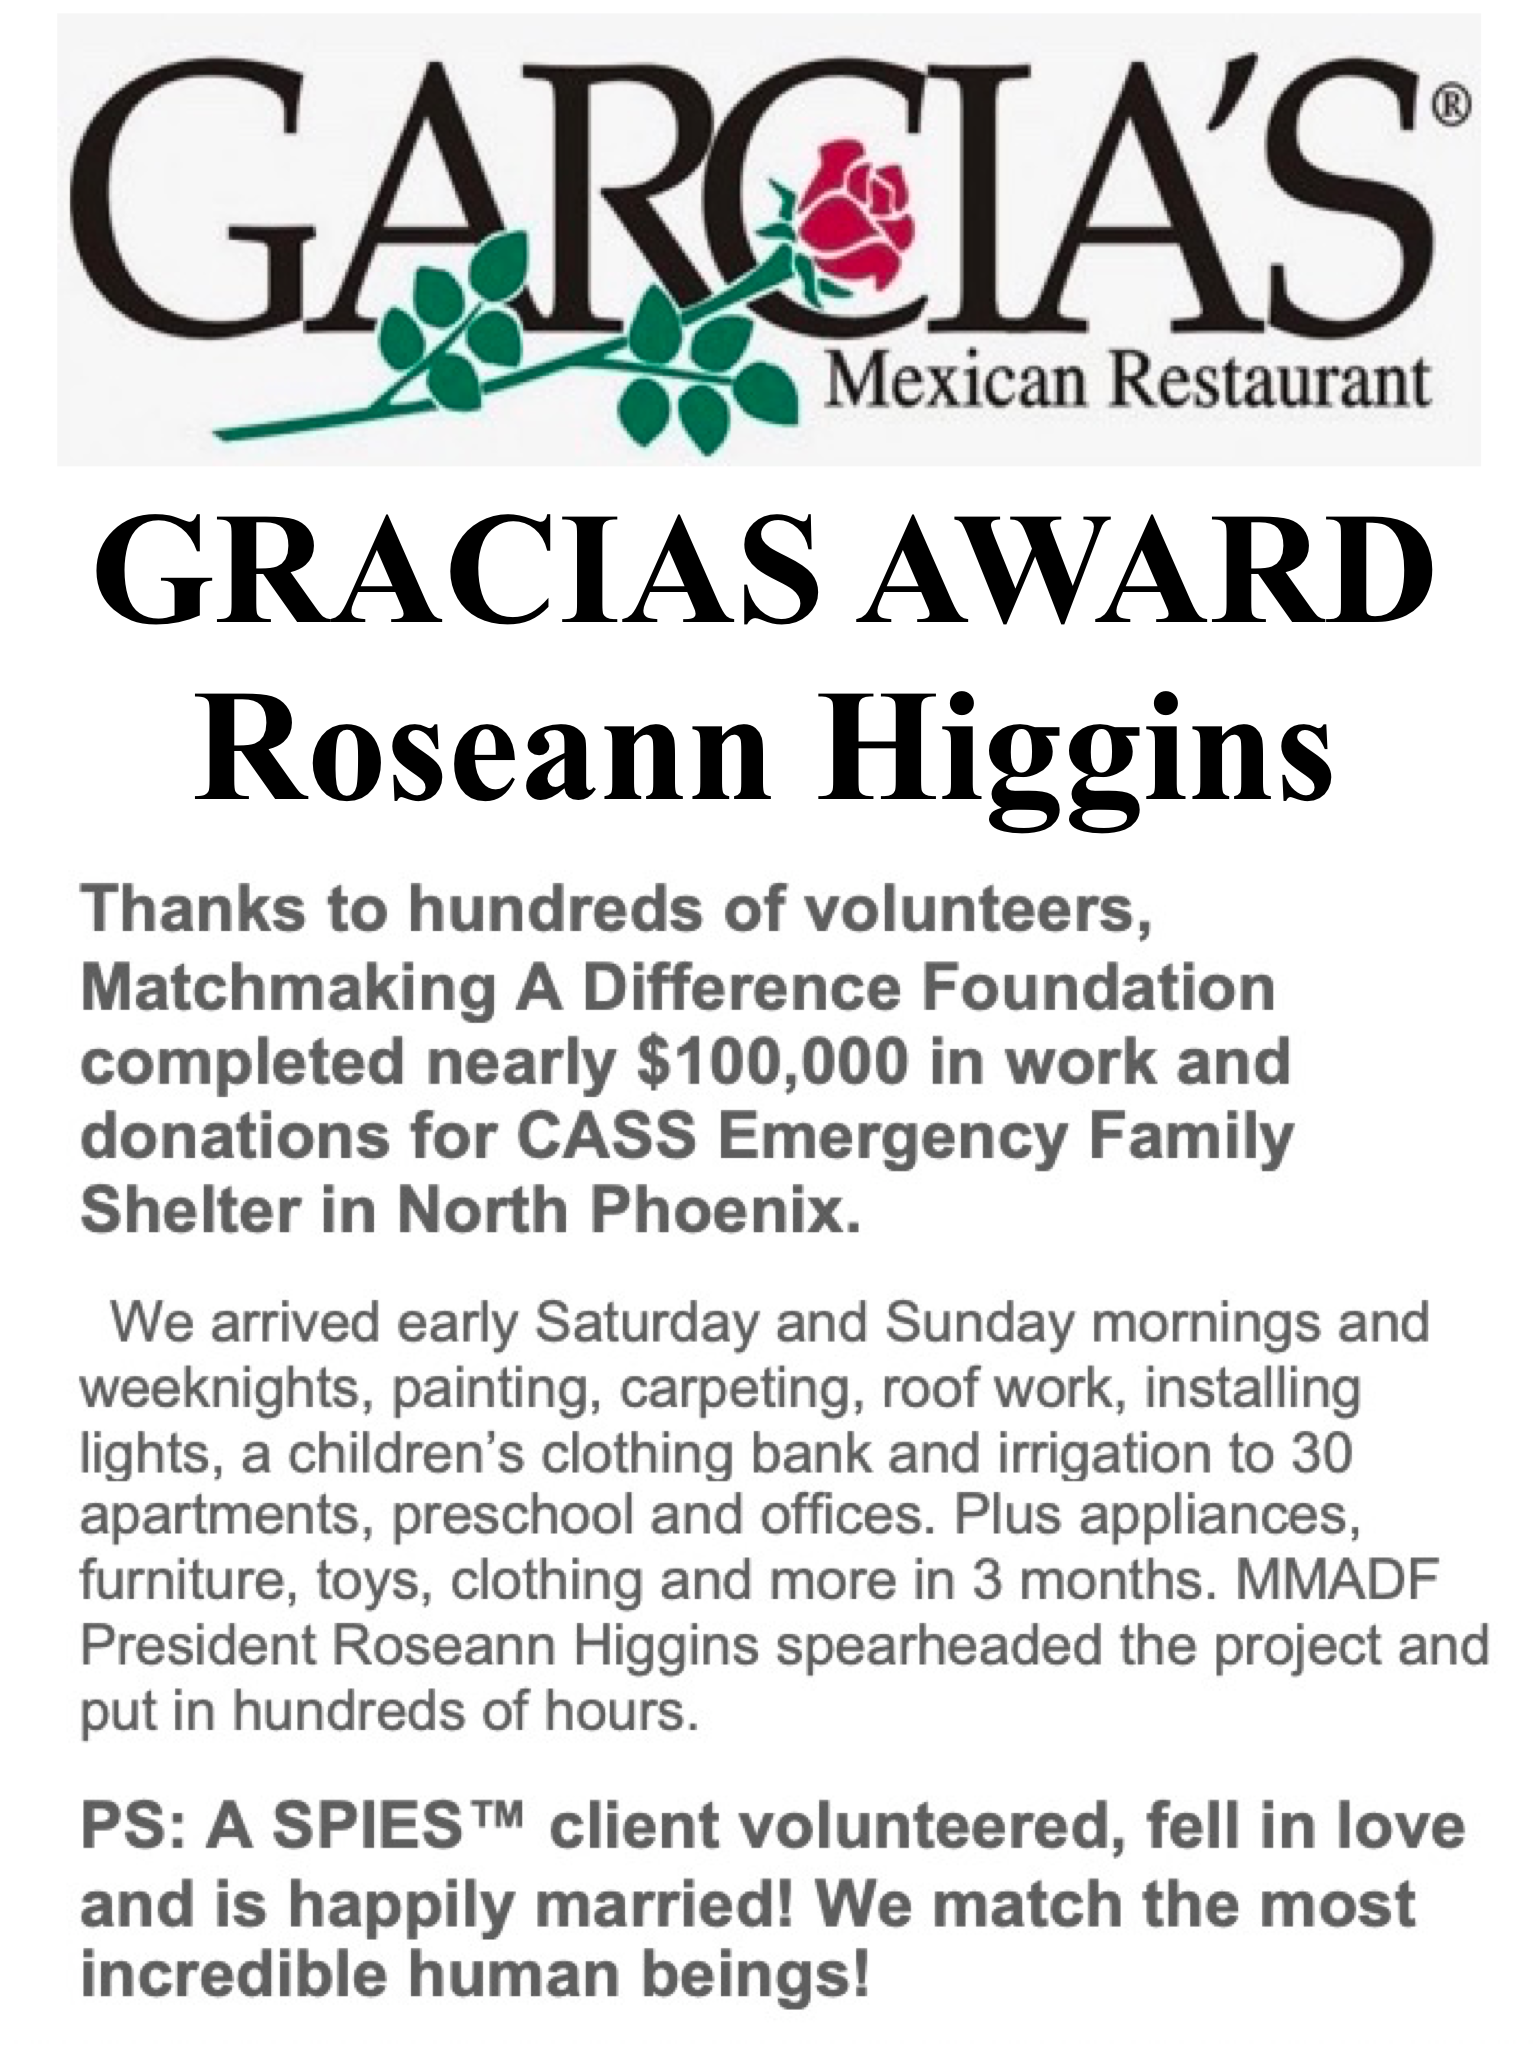 Garcias Gracias Award, Roseann Higgins, community service, community involvement, Matchmaking, Matchmaking A Difference Foundation, volunteers, volunteering, Phoenix, Arizona, CASS, homeless shelter, fundraising, leadership, SPIES, MMADF, marriage, happily ever after, falling in love, incredible human beings, good people,